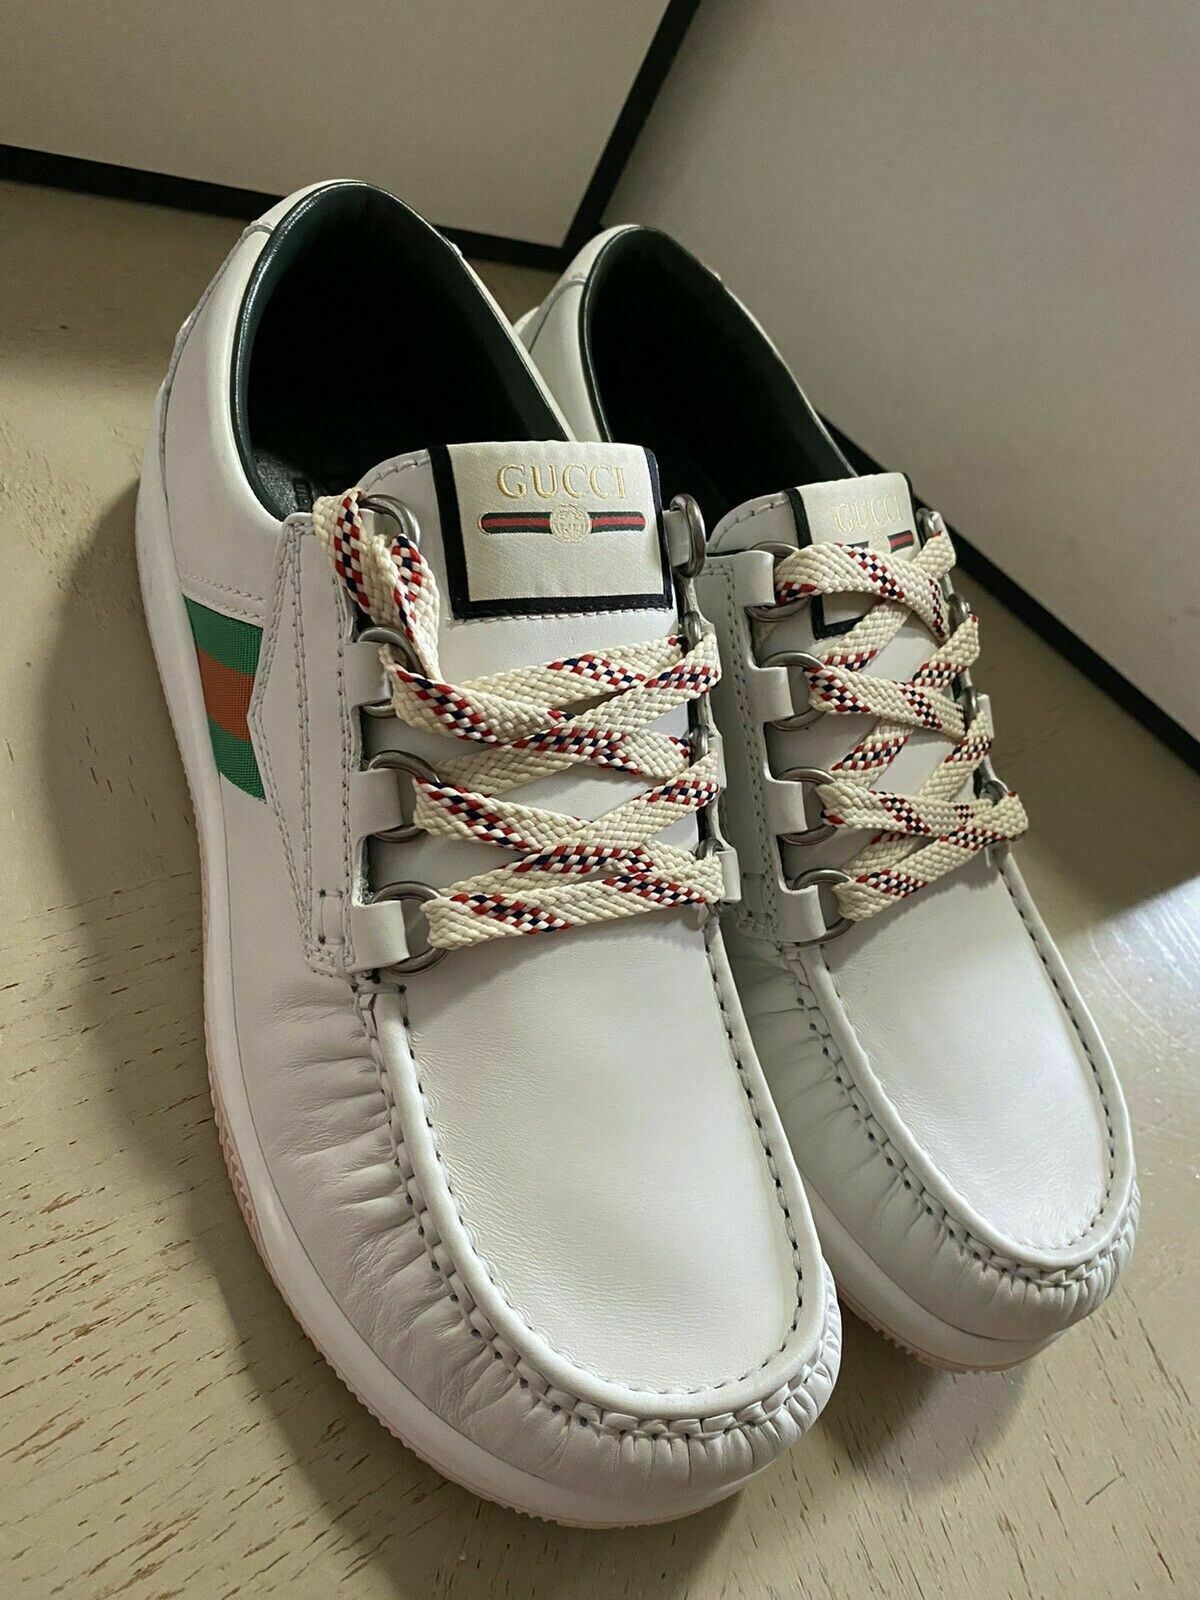 New Gucci Men’s Leather Sneakers Shoes White 9 US ( 8 UK ) Italy 575399